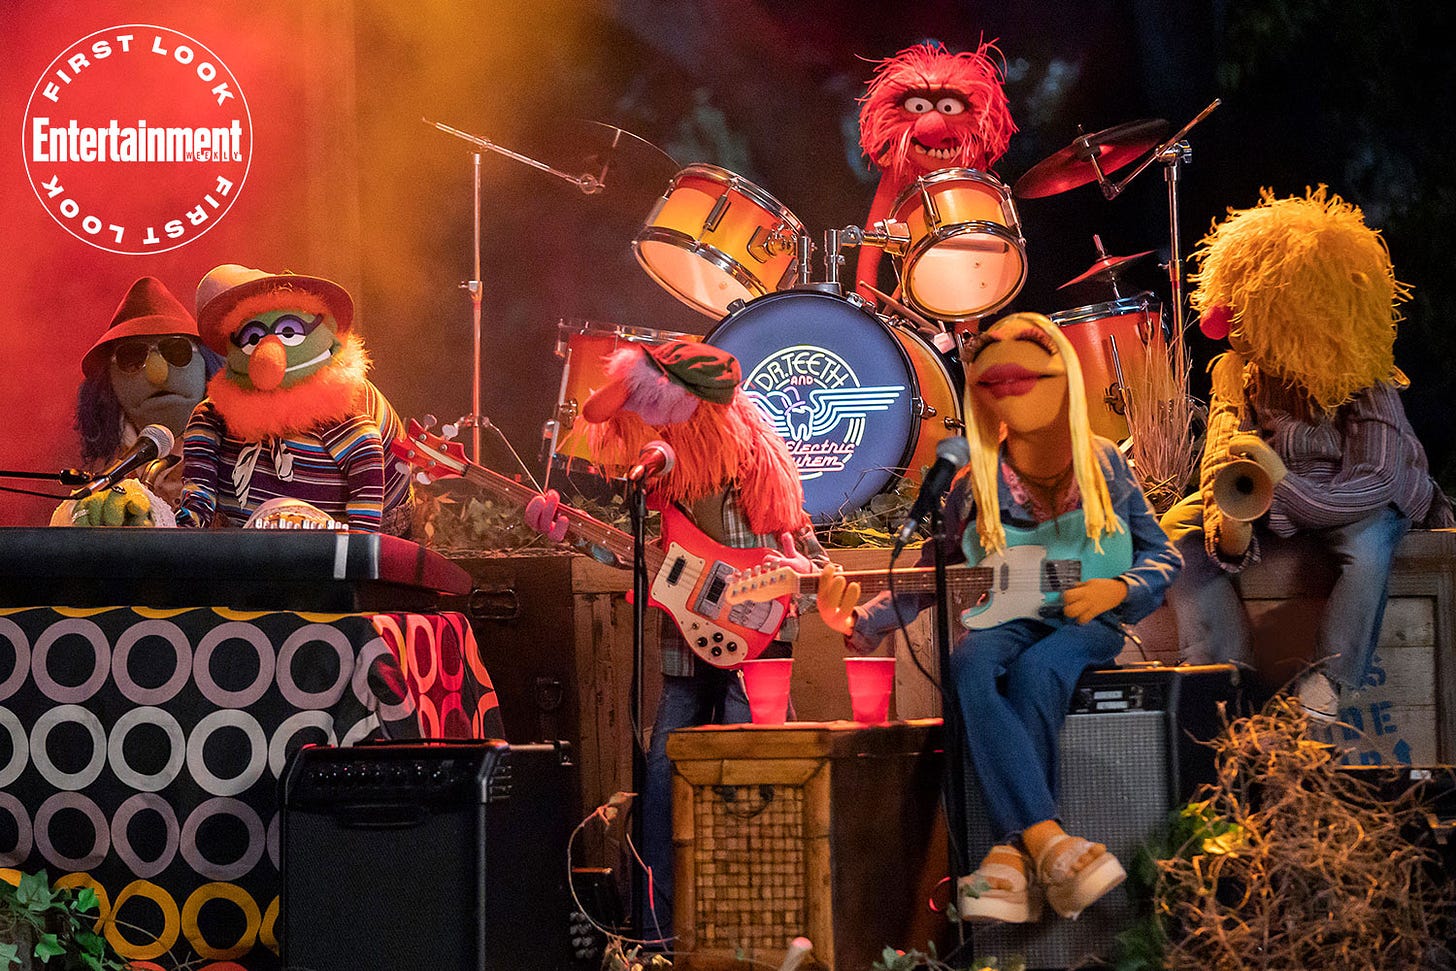 Dr. Teeth and the Electric Mayhem jam out